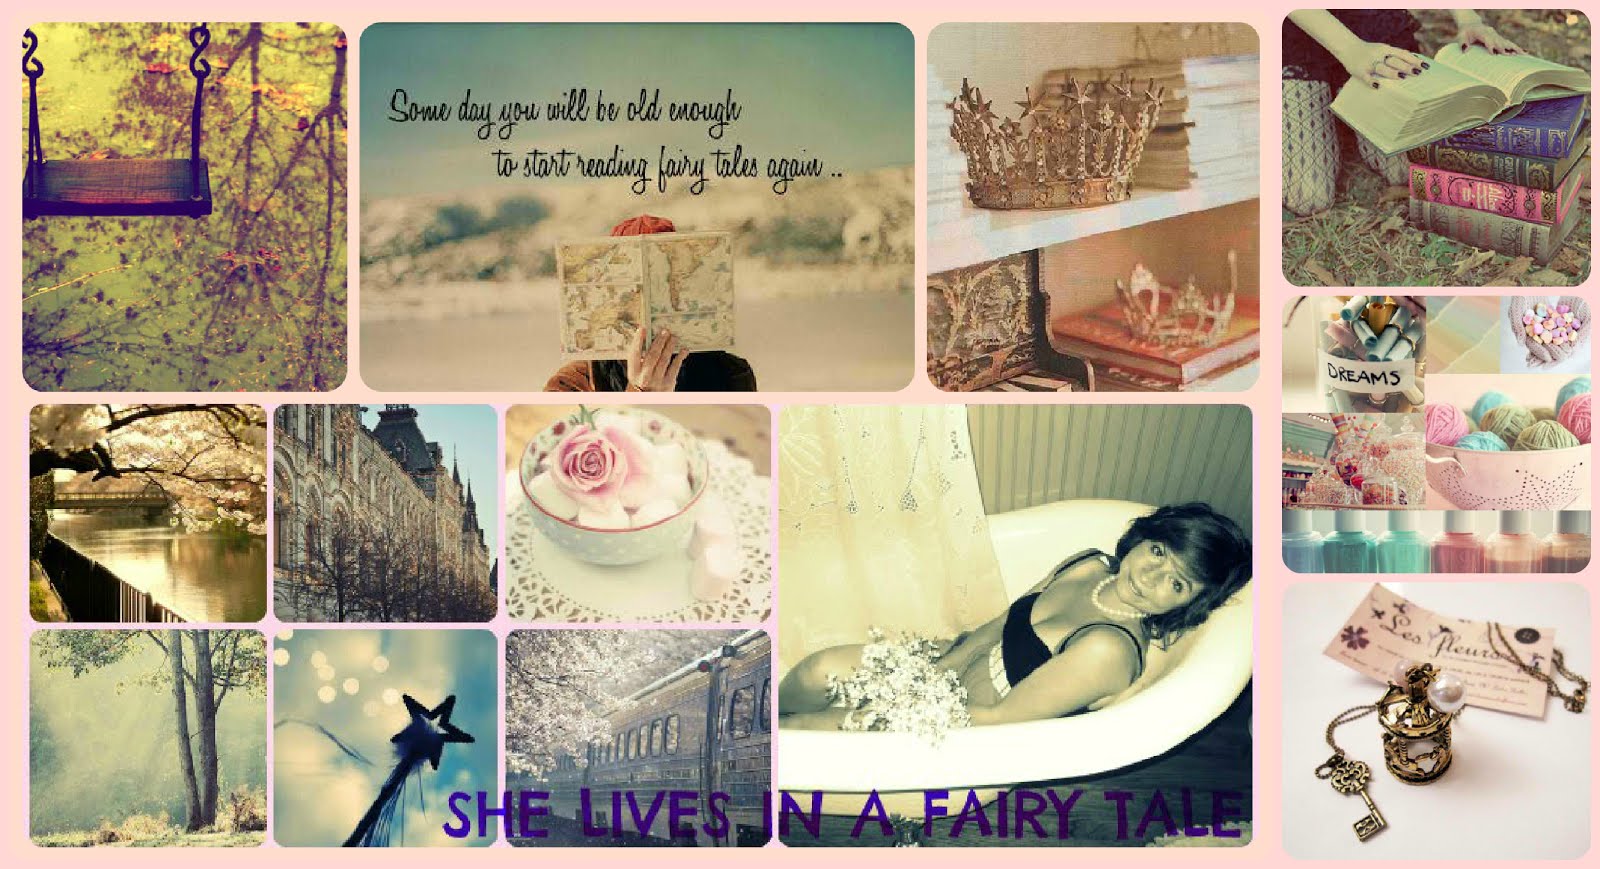 SHE LIVES IN A FAIRY TALE